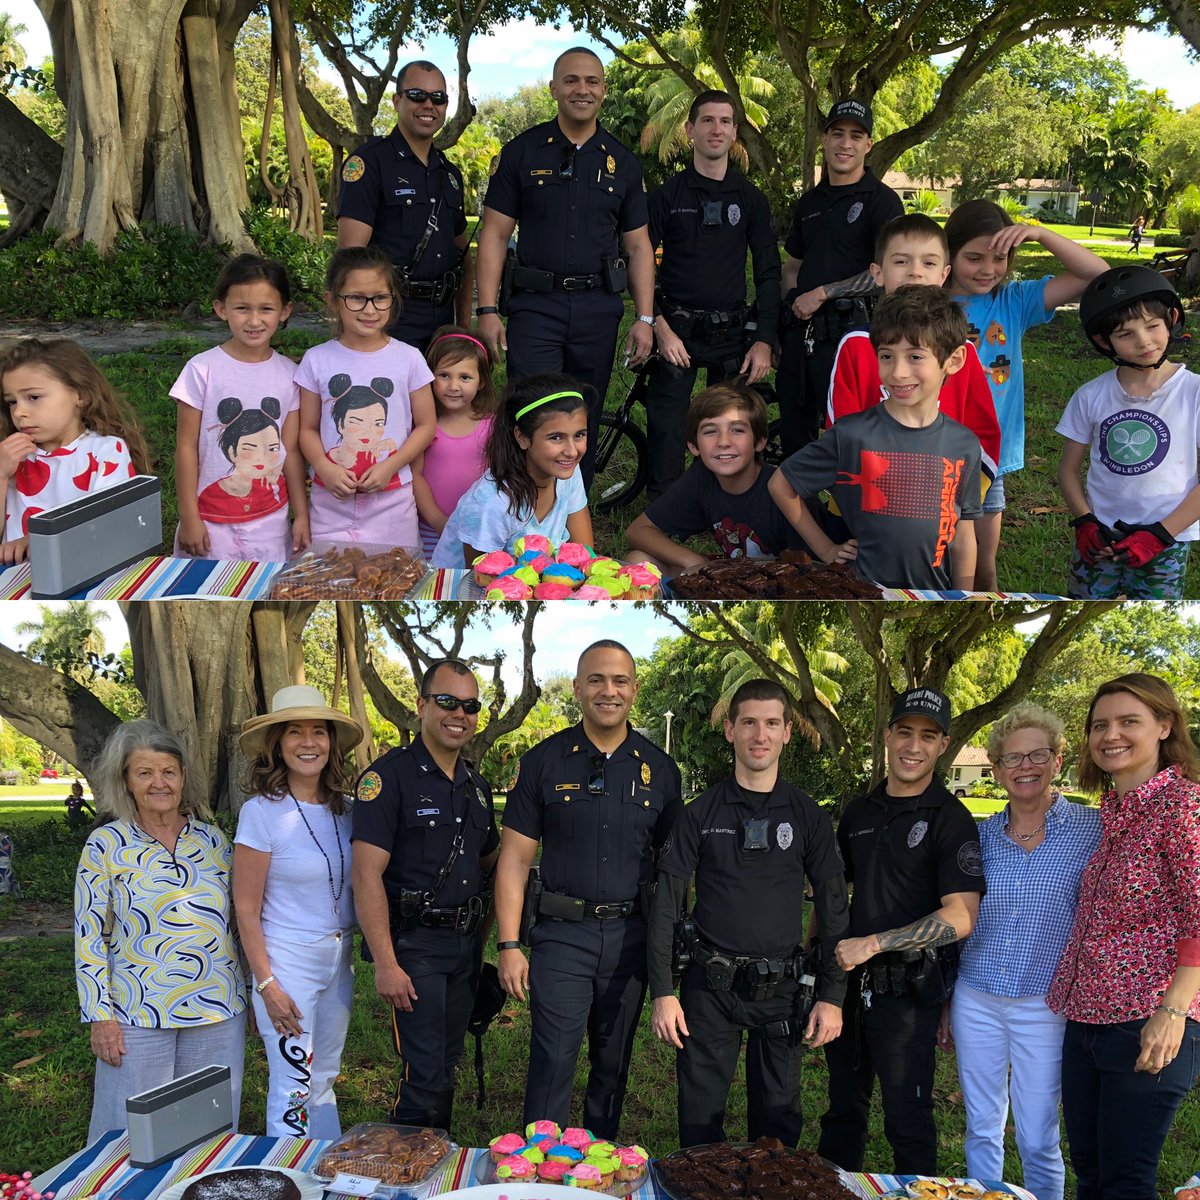 Thank you Bay Point for including Upper East Side officers and ⁦@MAbreuMPD⁩ in your Valentine’s Day Family Picnic and bake off! A great time was had by all!!! #communitypolicing #safestcity ⁦@LainezMpdk⁩ ⁦@Majormovesndss⁩ ⁦@MoralesMiamiPD⁩